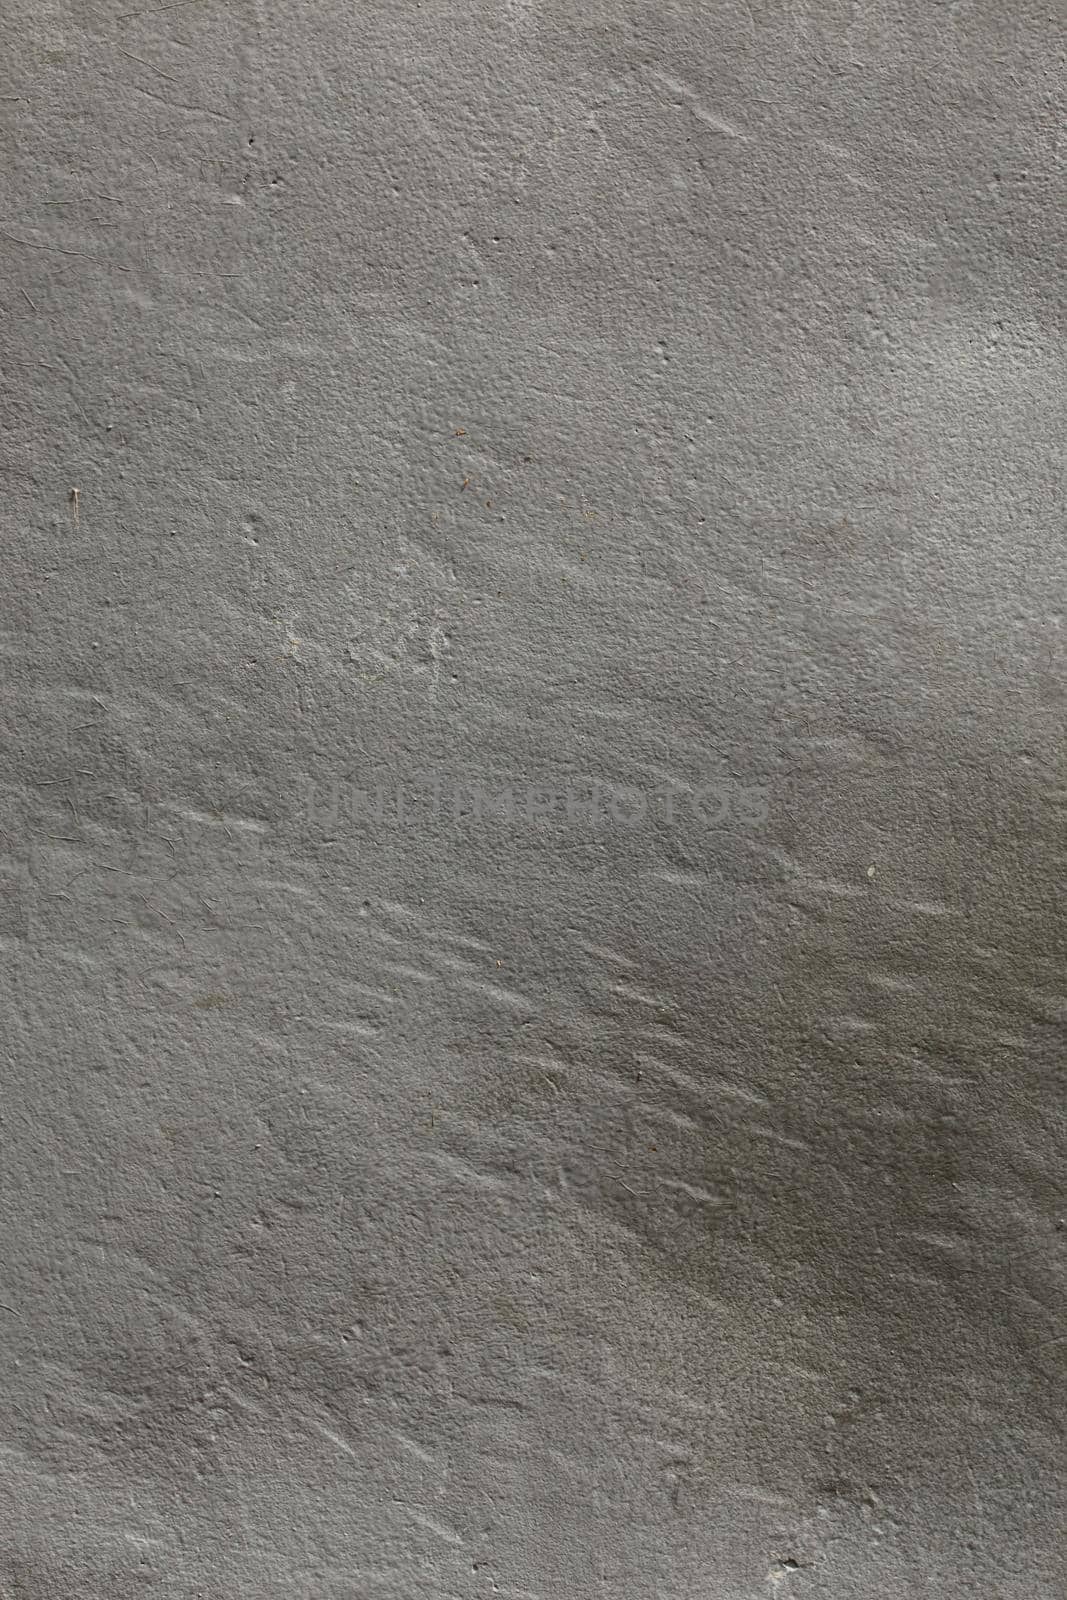 thick flat grey rough paint surface texture and background